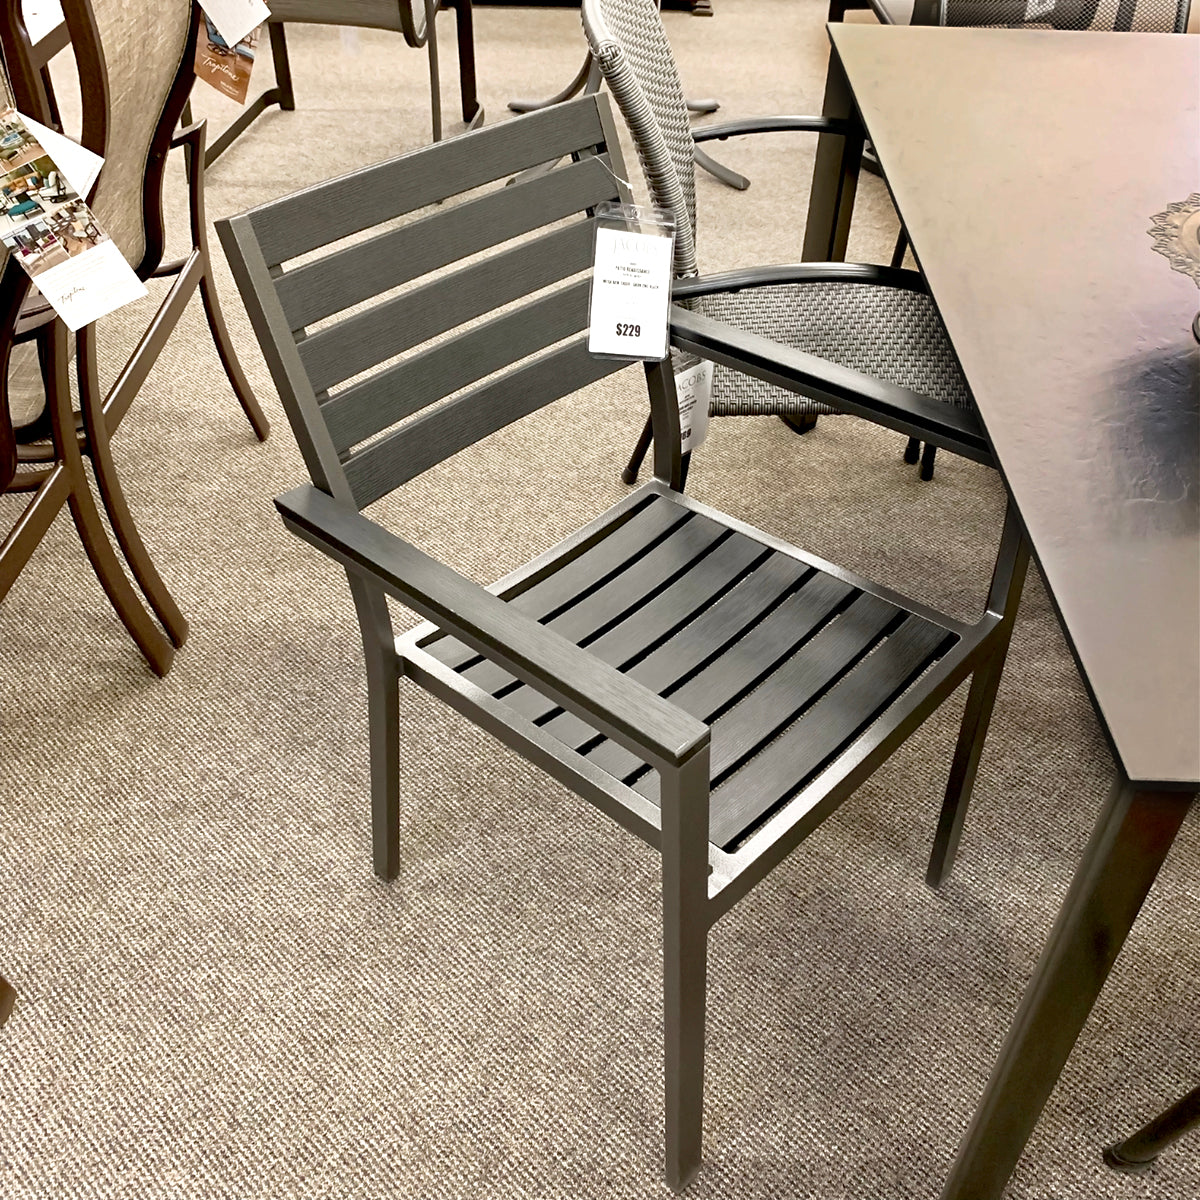 Patio Renaissance Mesa Patio Dining Arm Chair is available at Jacobs Custom Living our Jacobs Custom Living Spokane Valley showroom.